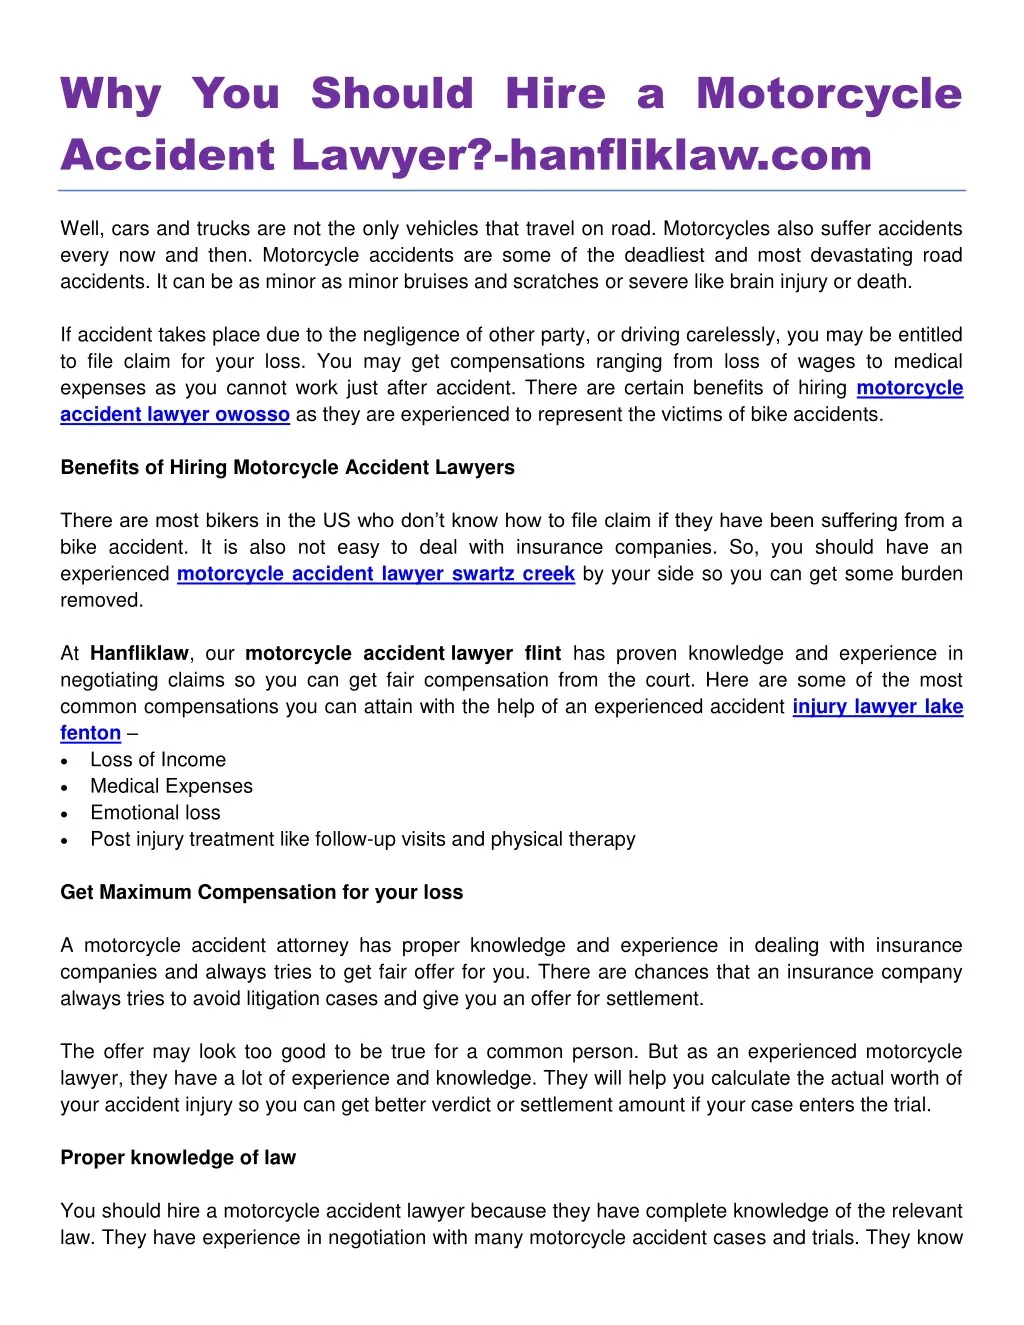 why you should hire a motorcycle accident lawyer